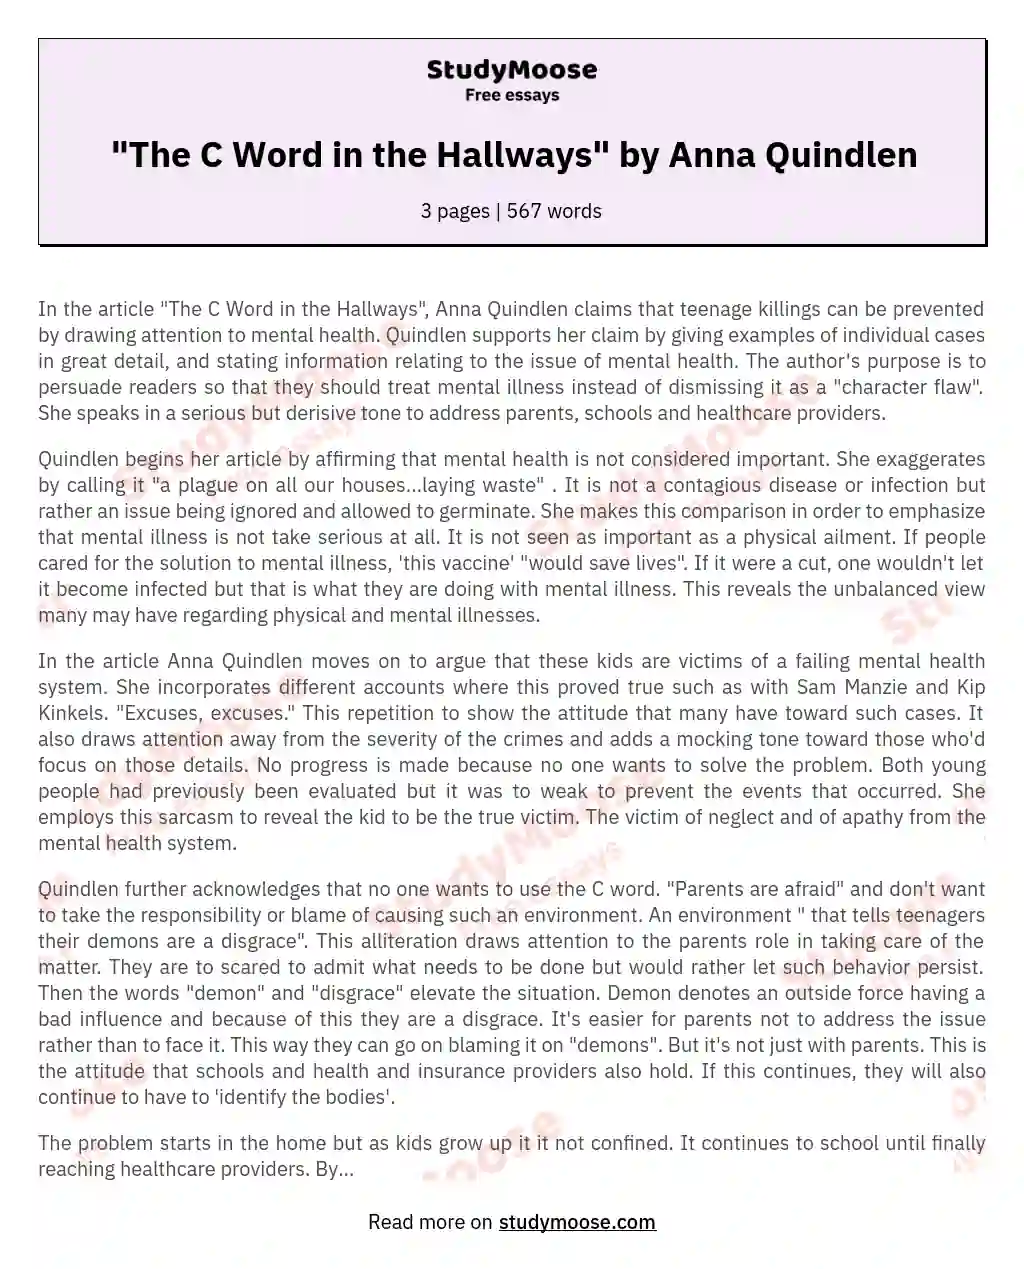 "The C Word in the Hallways" by Anna Quindlen essay